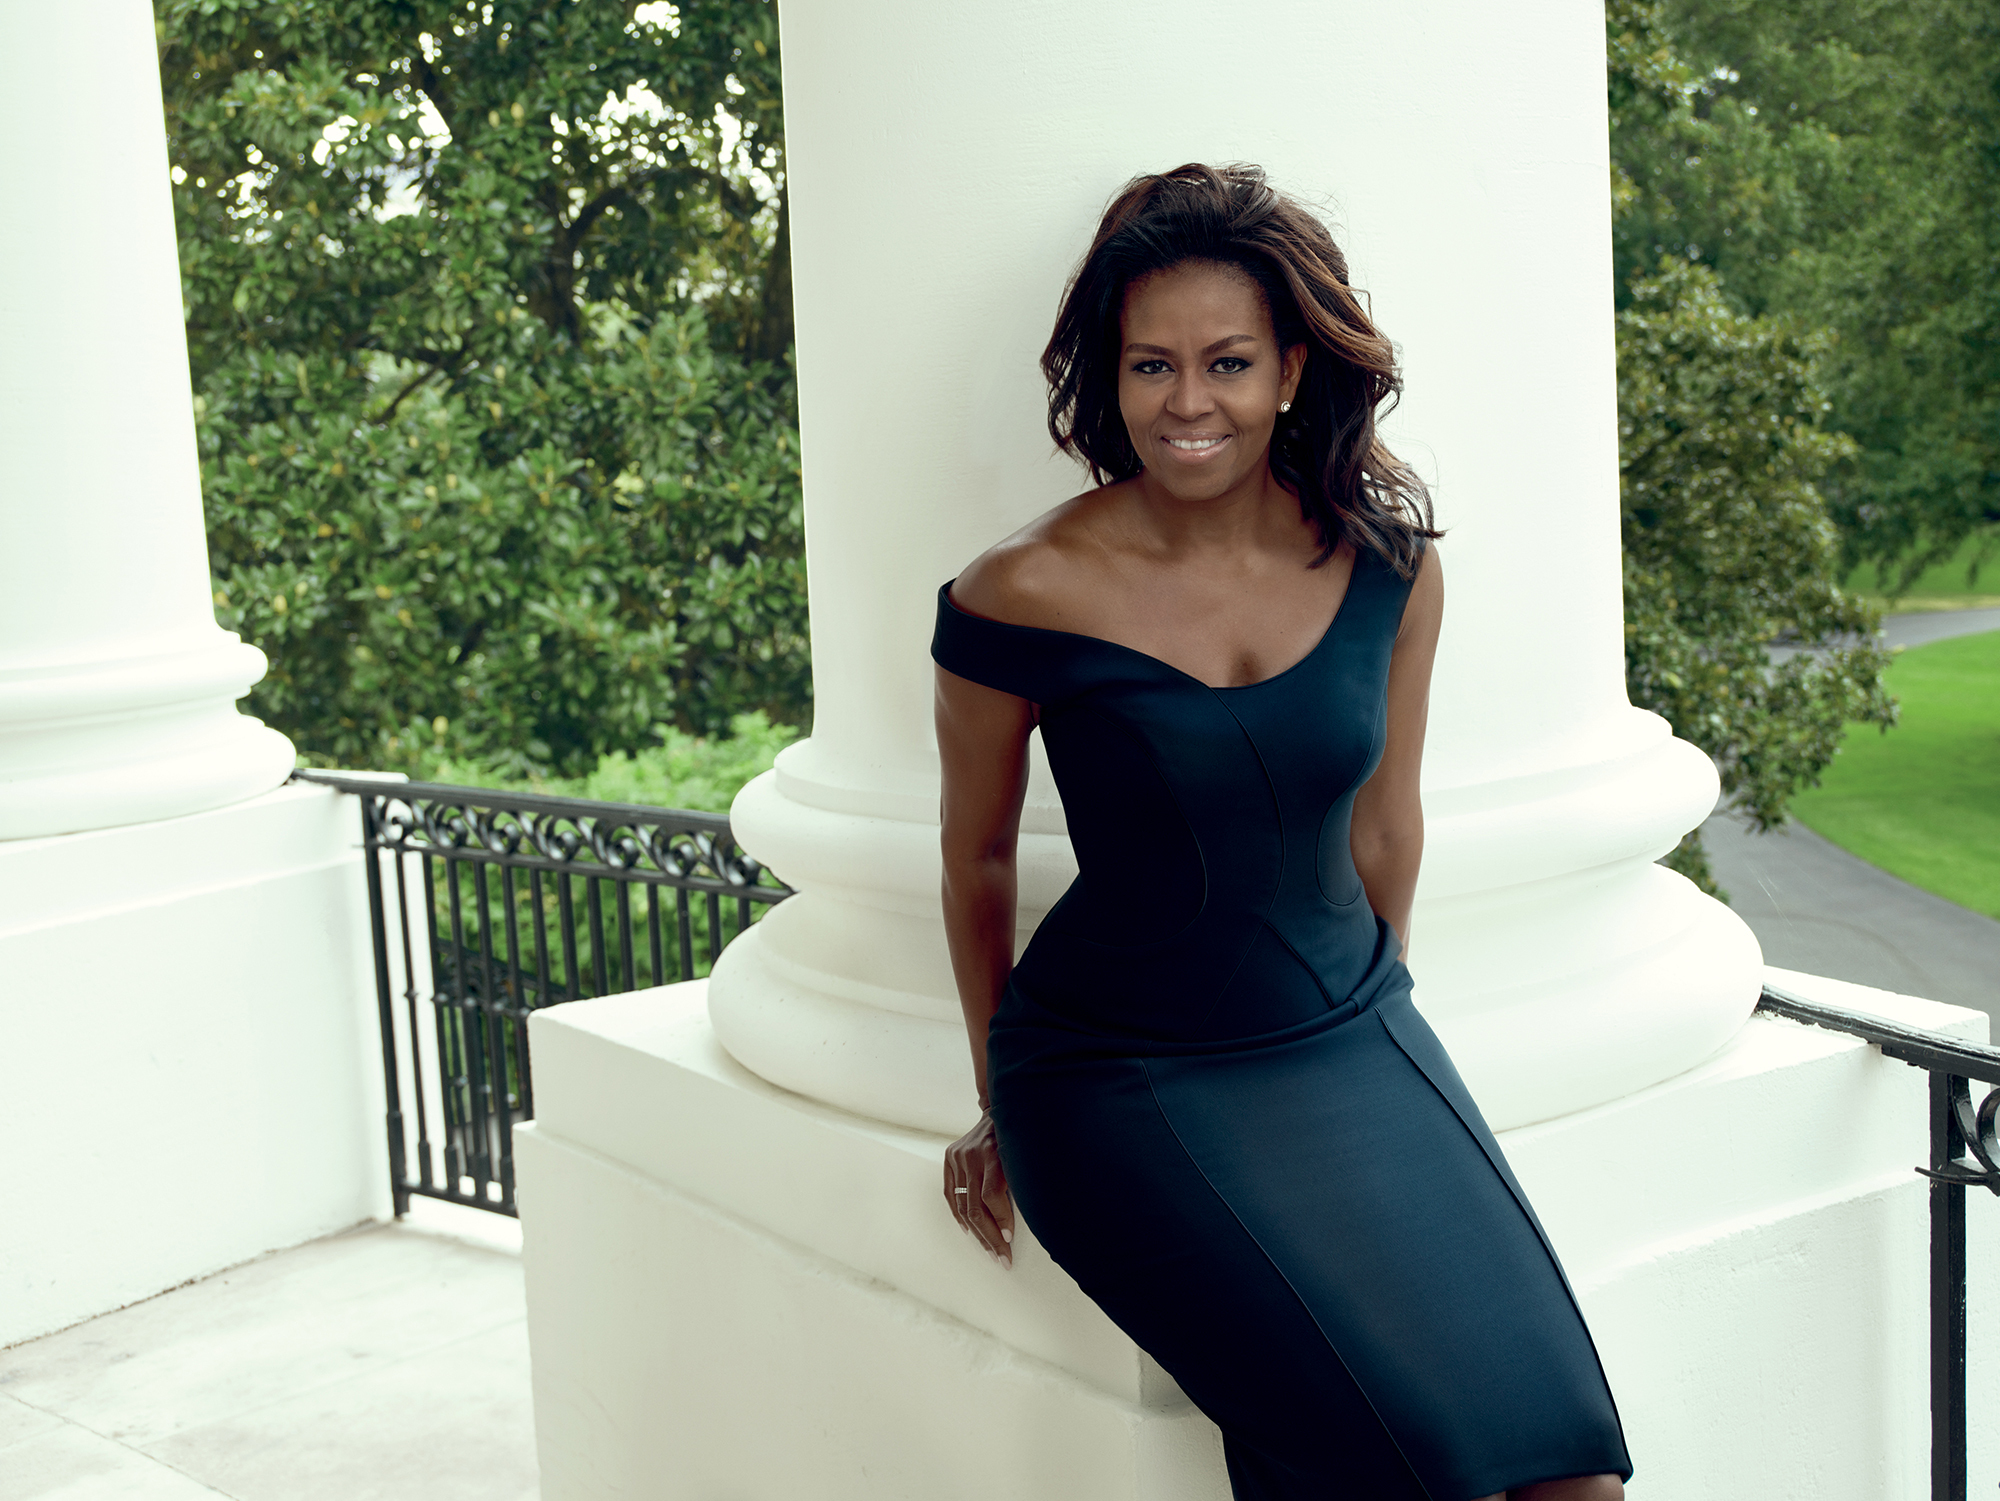   The United States’ former first lady has become a major influencer over the last decade. Here’s how Michelle Obama built such a powerful personal brand.  